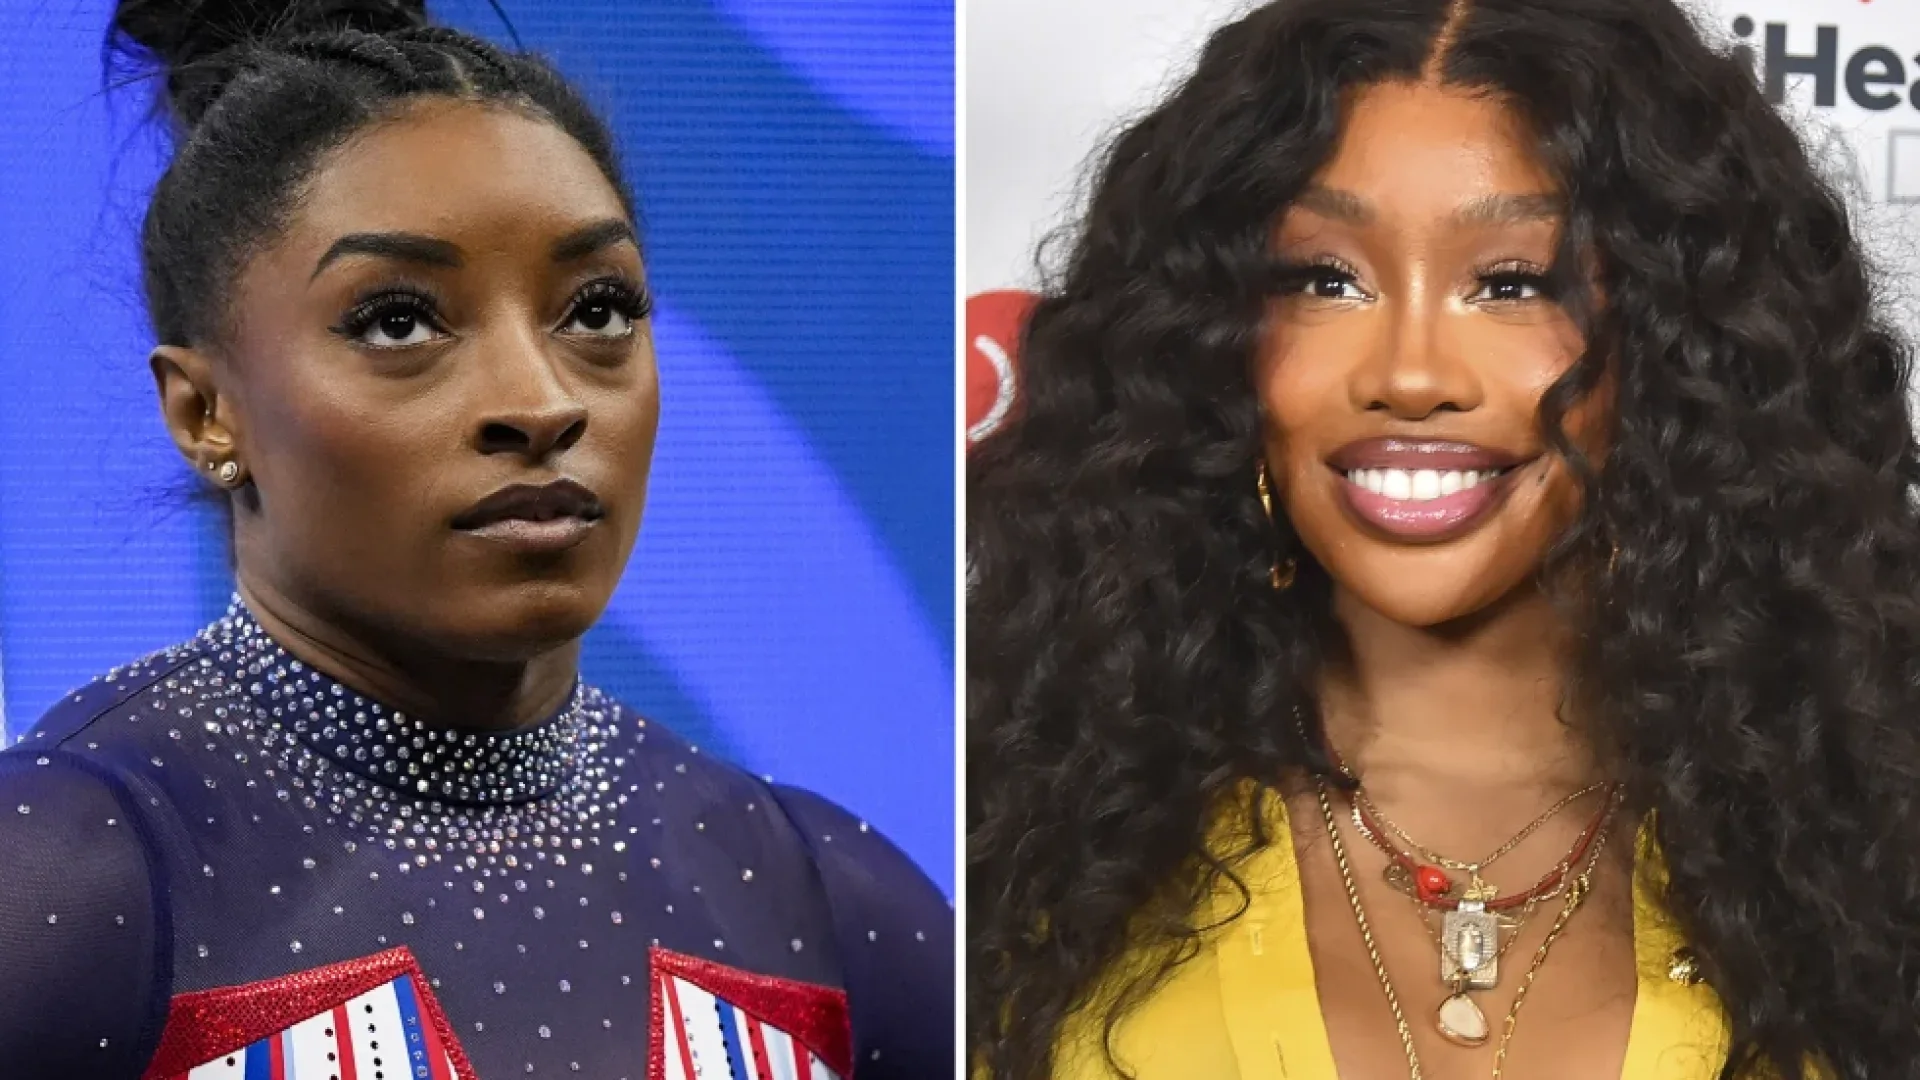 SZA Shows Off Her Gymnastics Skills In Friendly Competition With Simone Biles Ahead Of The Paris Olympics